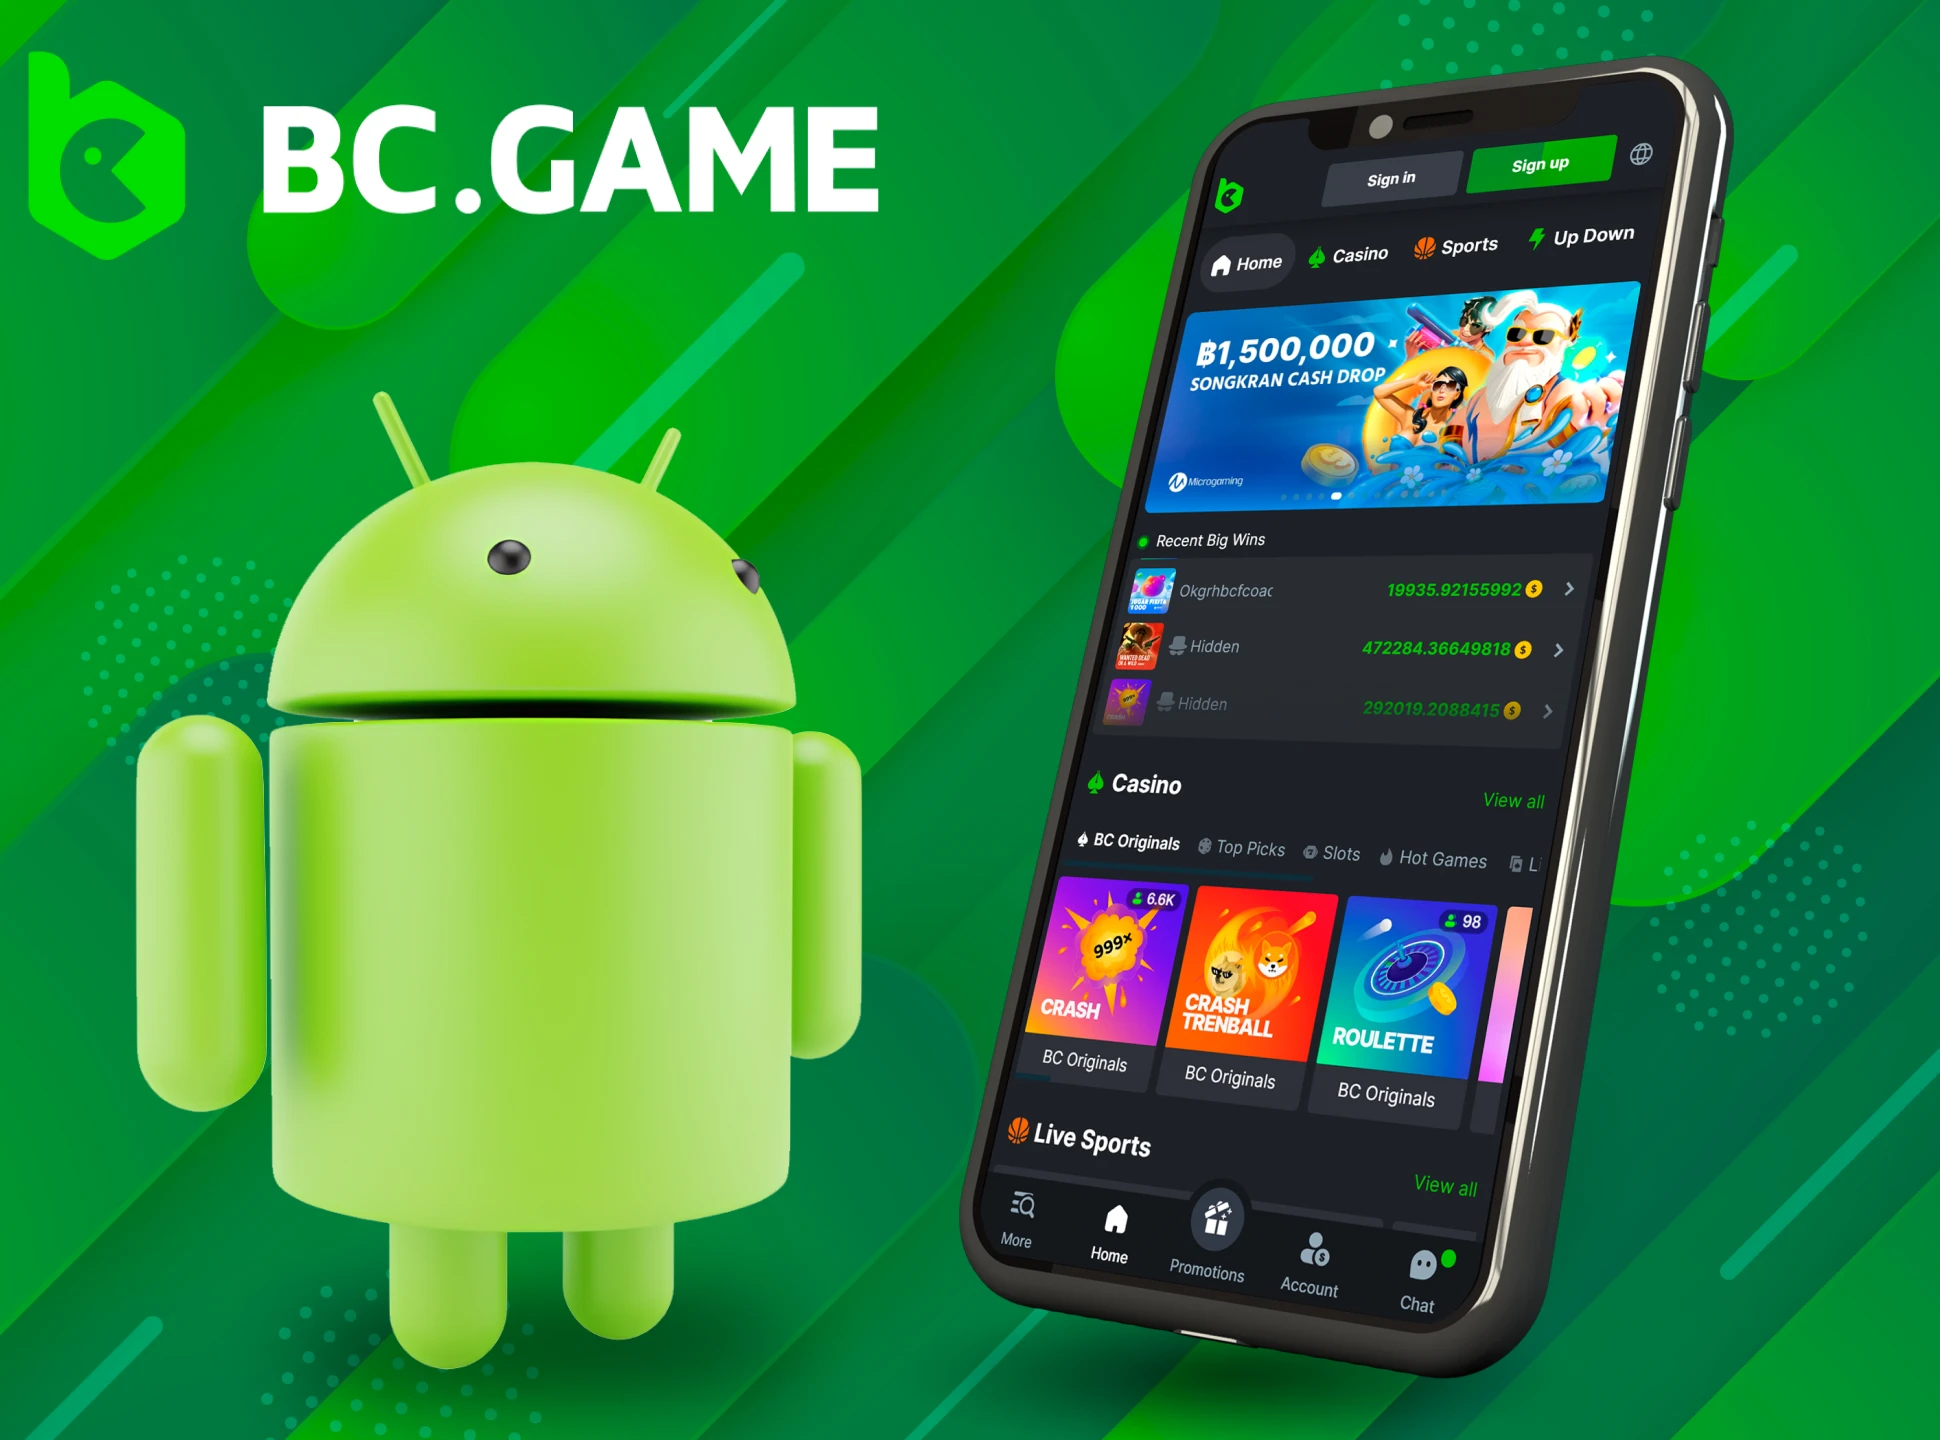 Play BC Game Casino directly from your phone using their app.